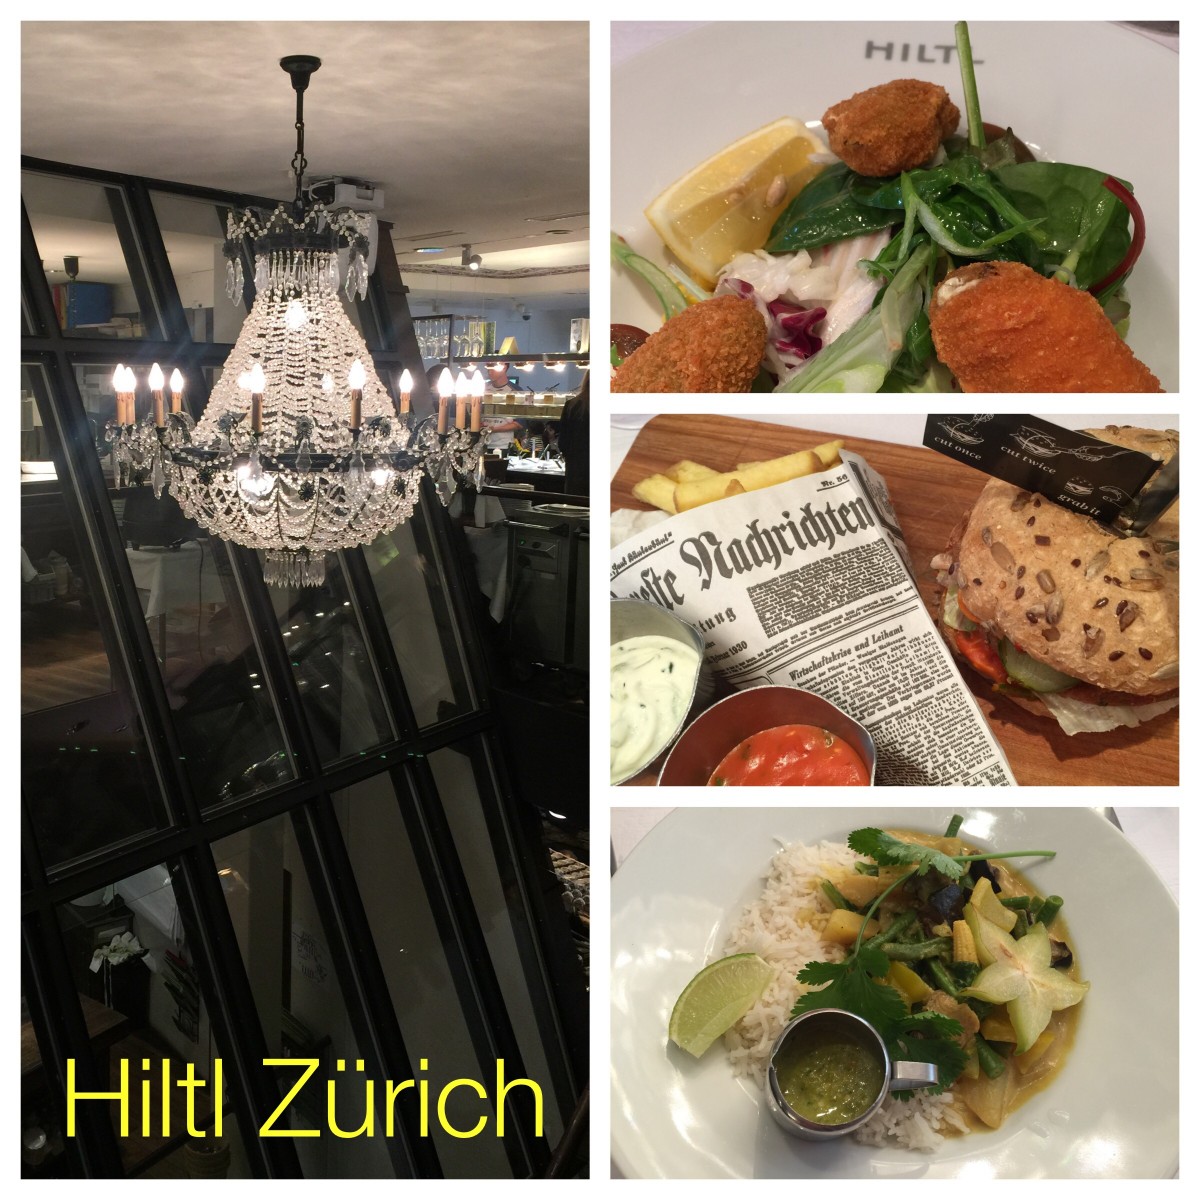 Two favorite restaurants located in Zurich – Menus with an Eastern breeze and delicious curry dishes